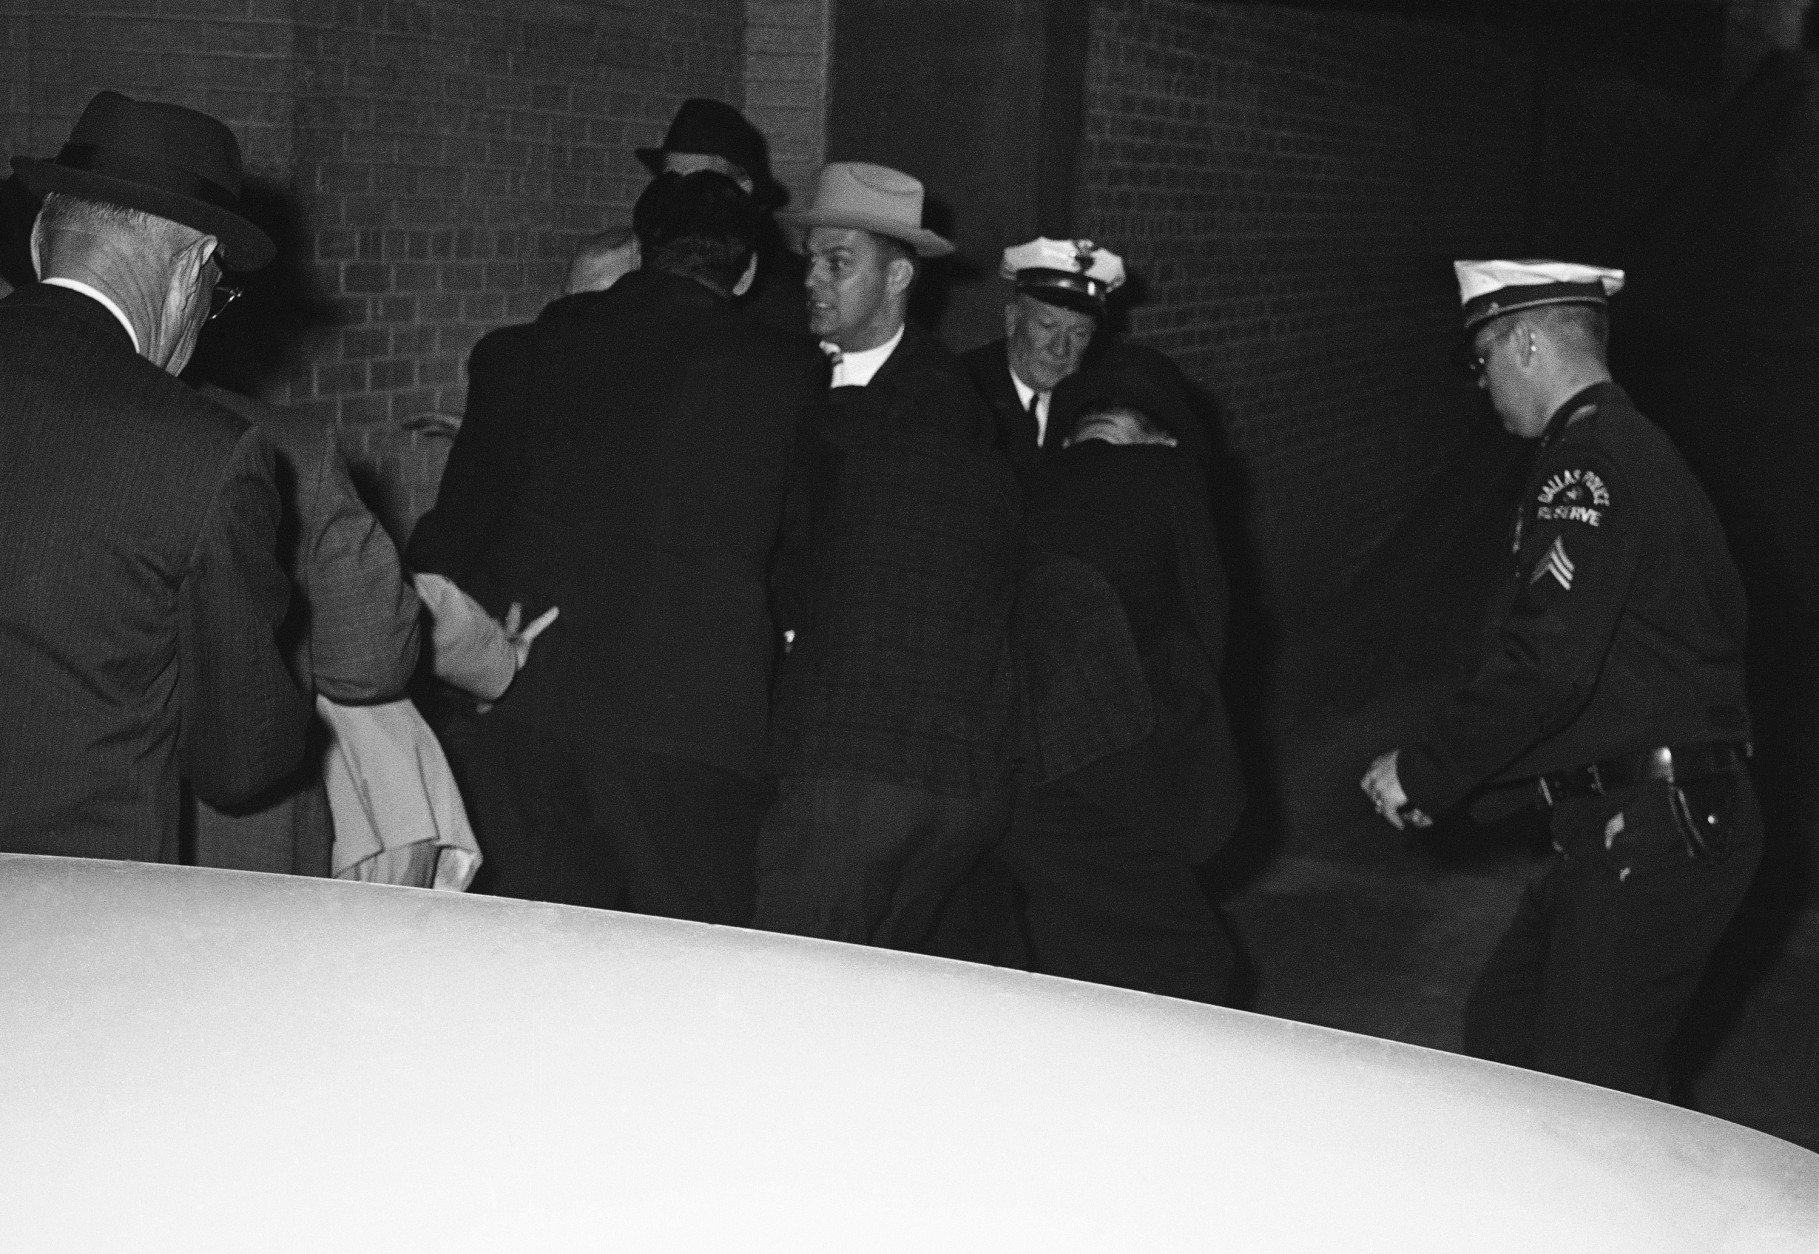 Plainclothes officers of the Dallas Police Department struggle with a man, identified as nightclub owner Jack Ruby, moments after he shot Lee Harvey Oswald, accused assassin of President Kennedy, outside the Dallas City Jail, Nov. 24, 1963 in Dallas. Ruby is not visible. (AP Photo/David F. Smith)